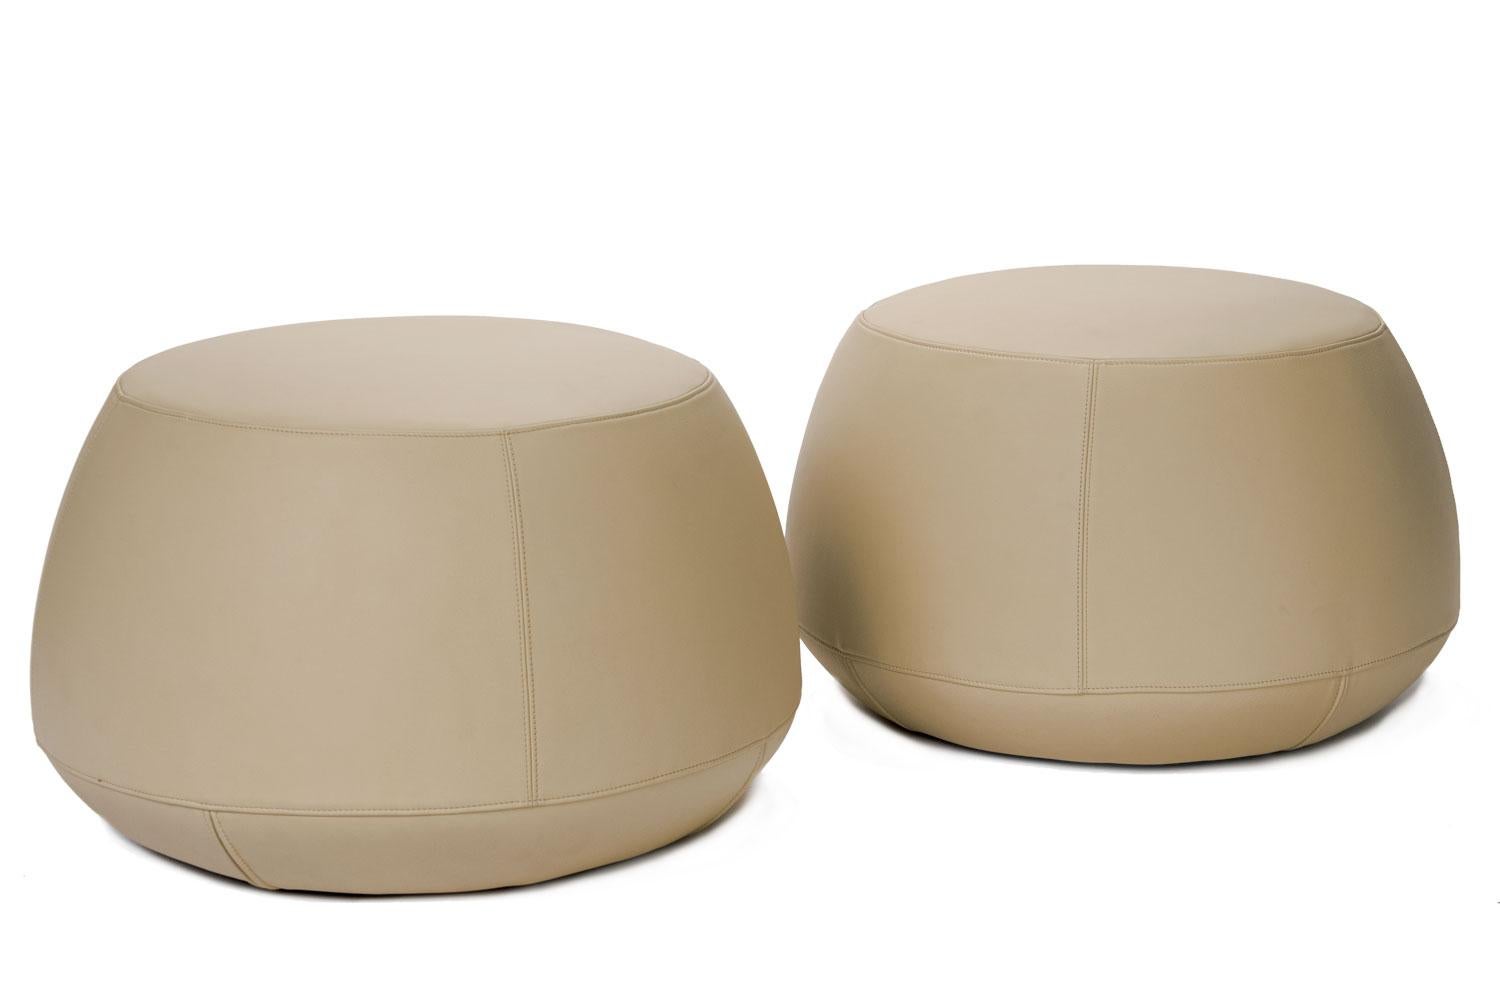 Ile round pouf by Bensen

These Poufs/Ottomans from Bensen are a flexible addition to any space. Multi-functional as additional seating, small table, or stool the detail is not only a visual feature that lightens the look of the piece it also